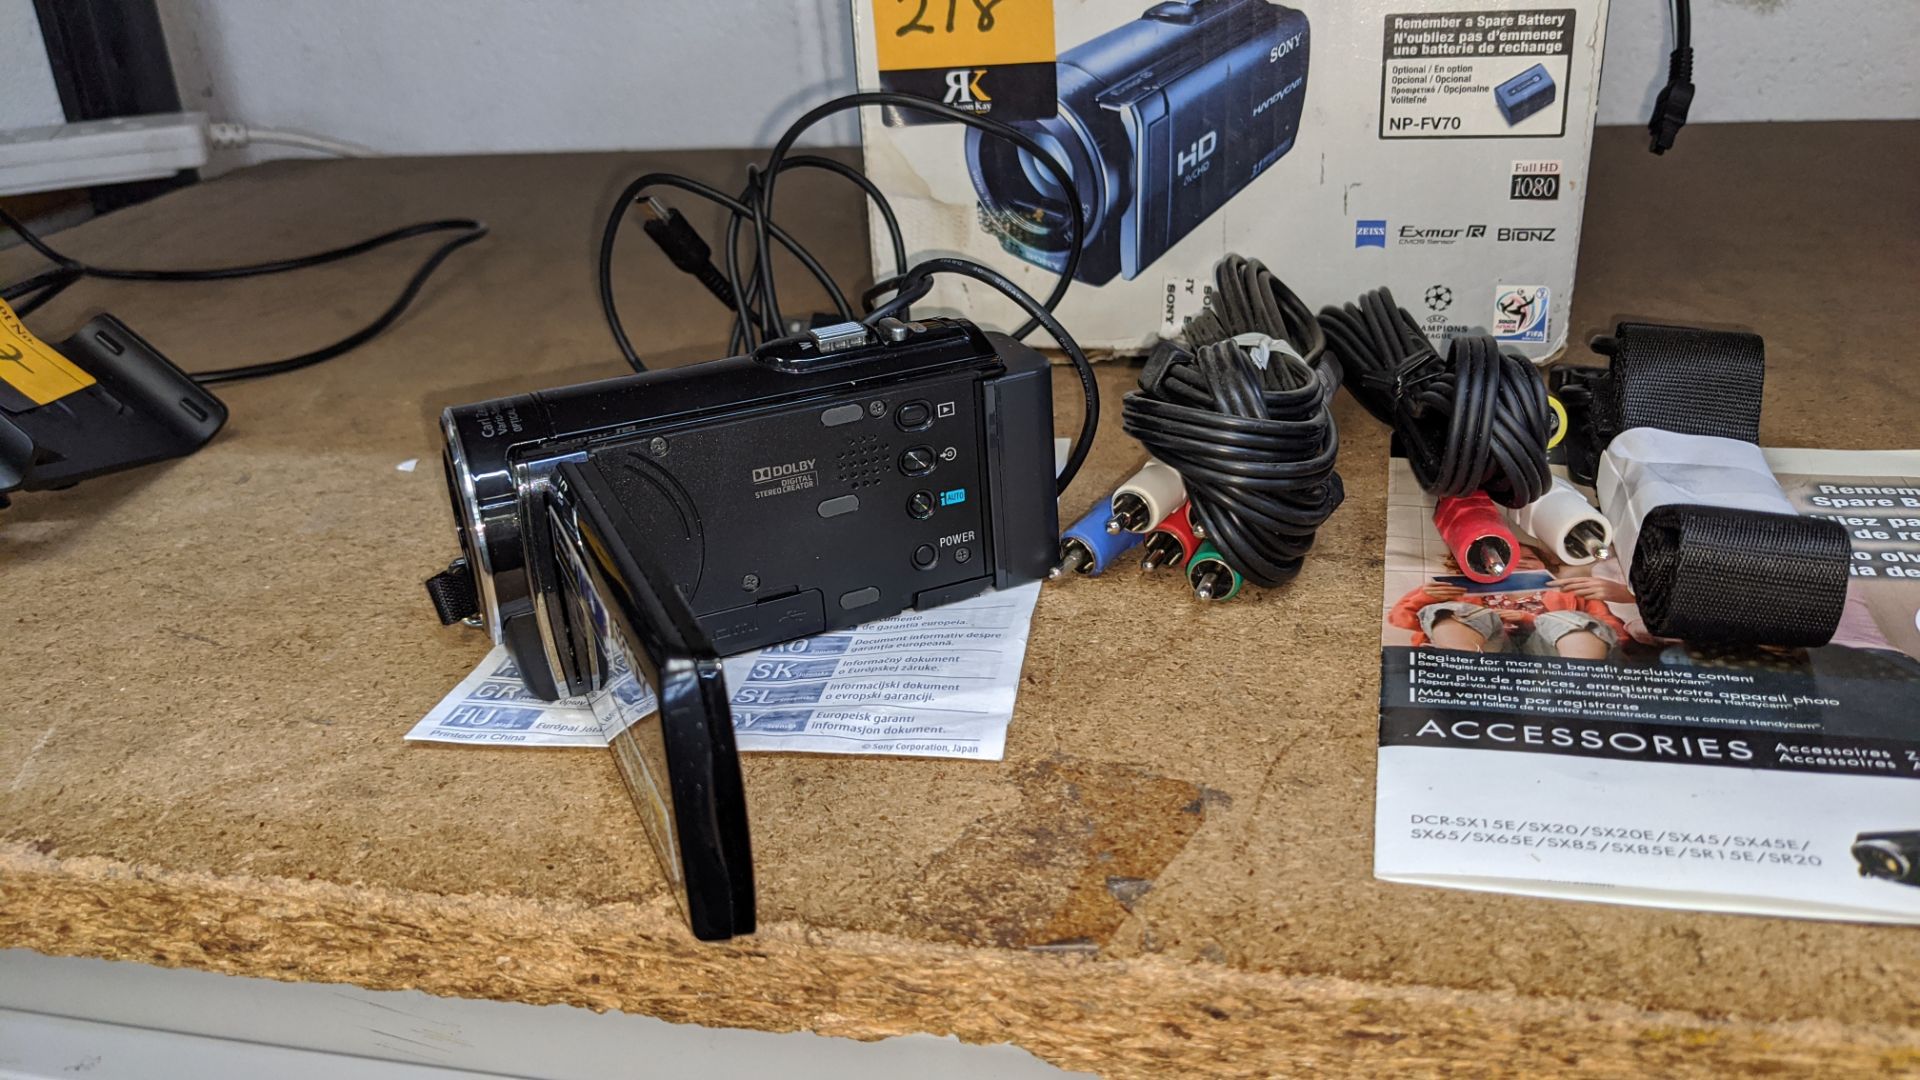 Sony Handycam video camera model HDR-CX115E including box, manual, cables & accessories - Image 4 of 8